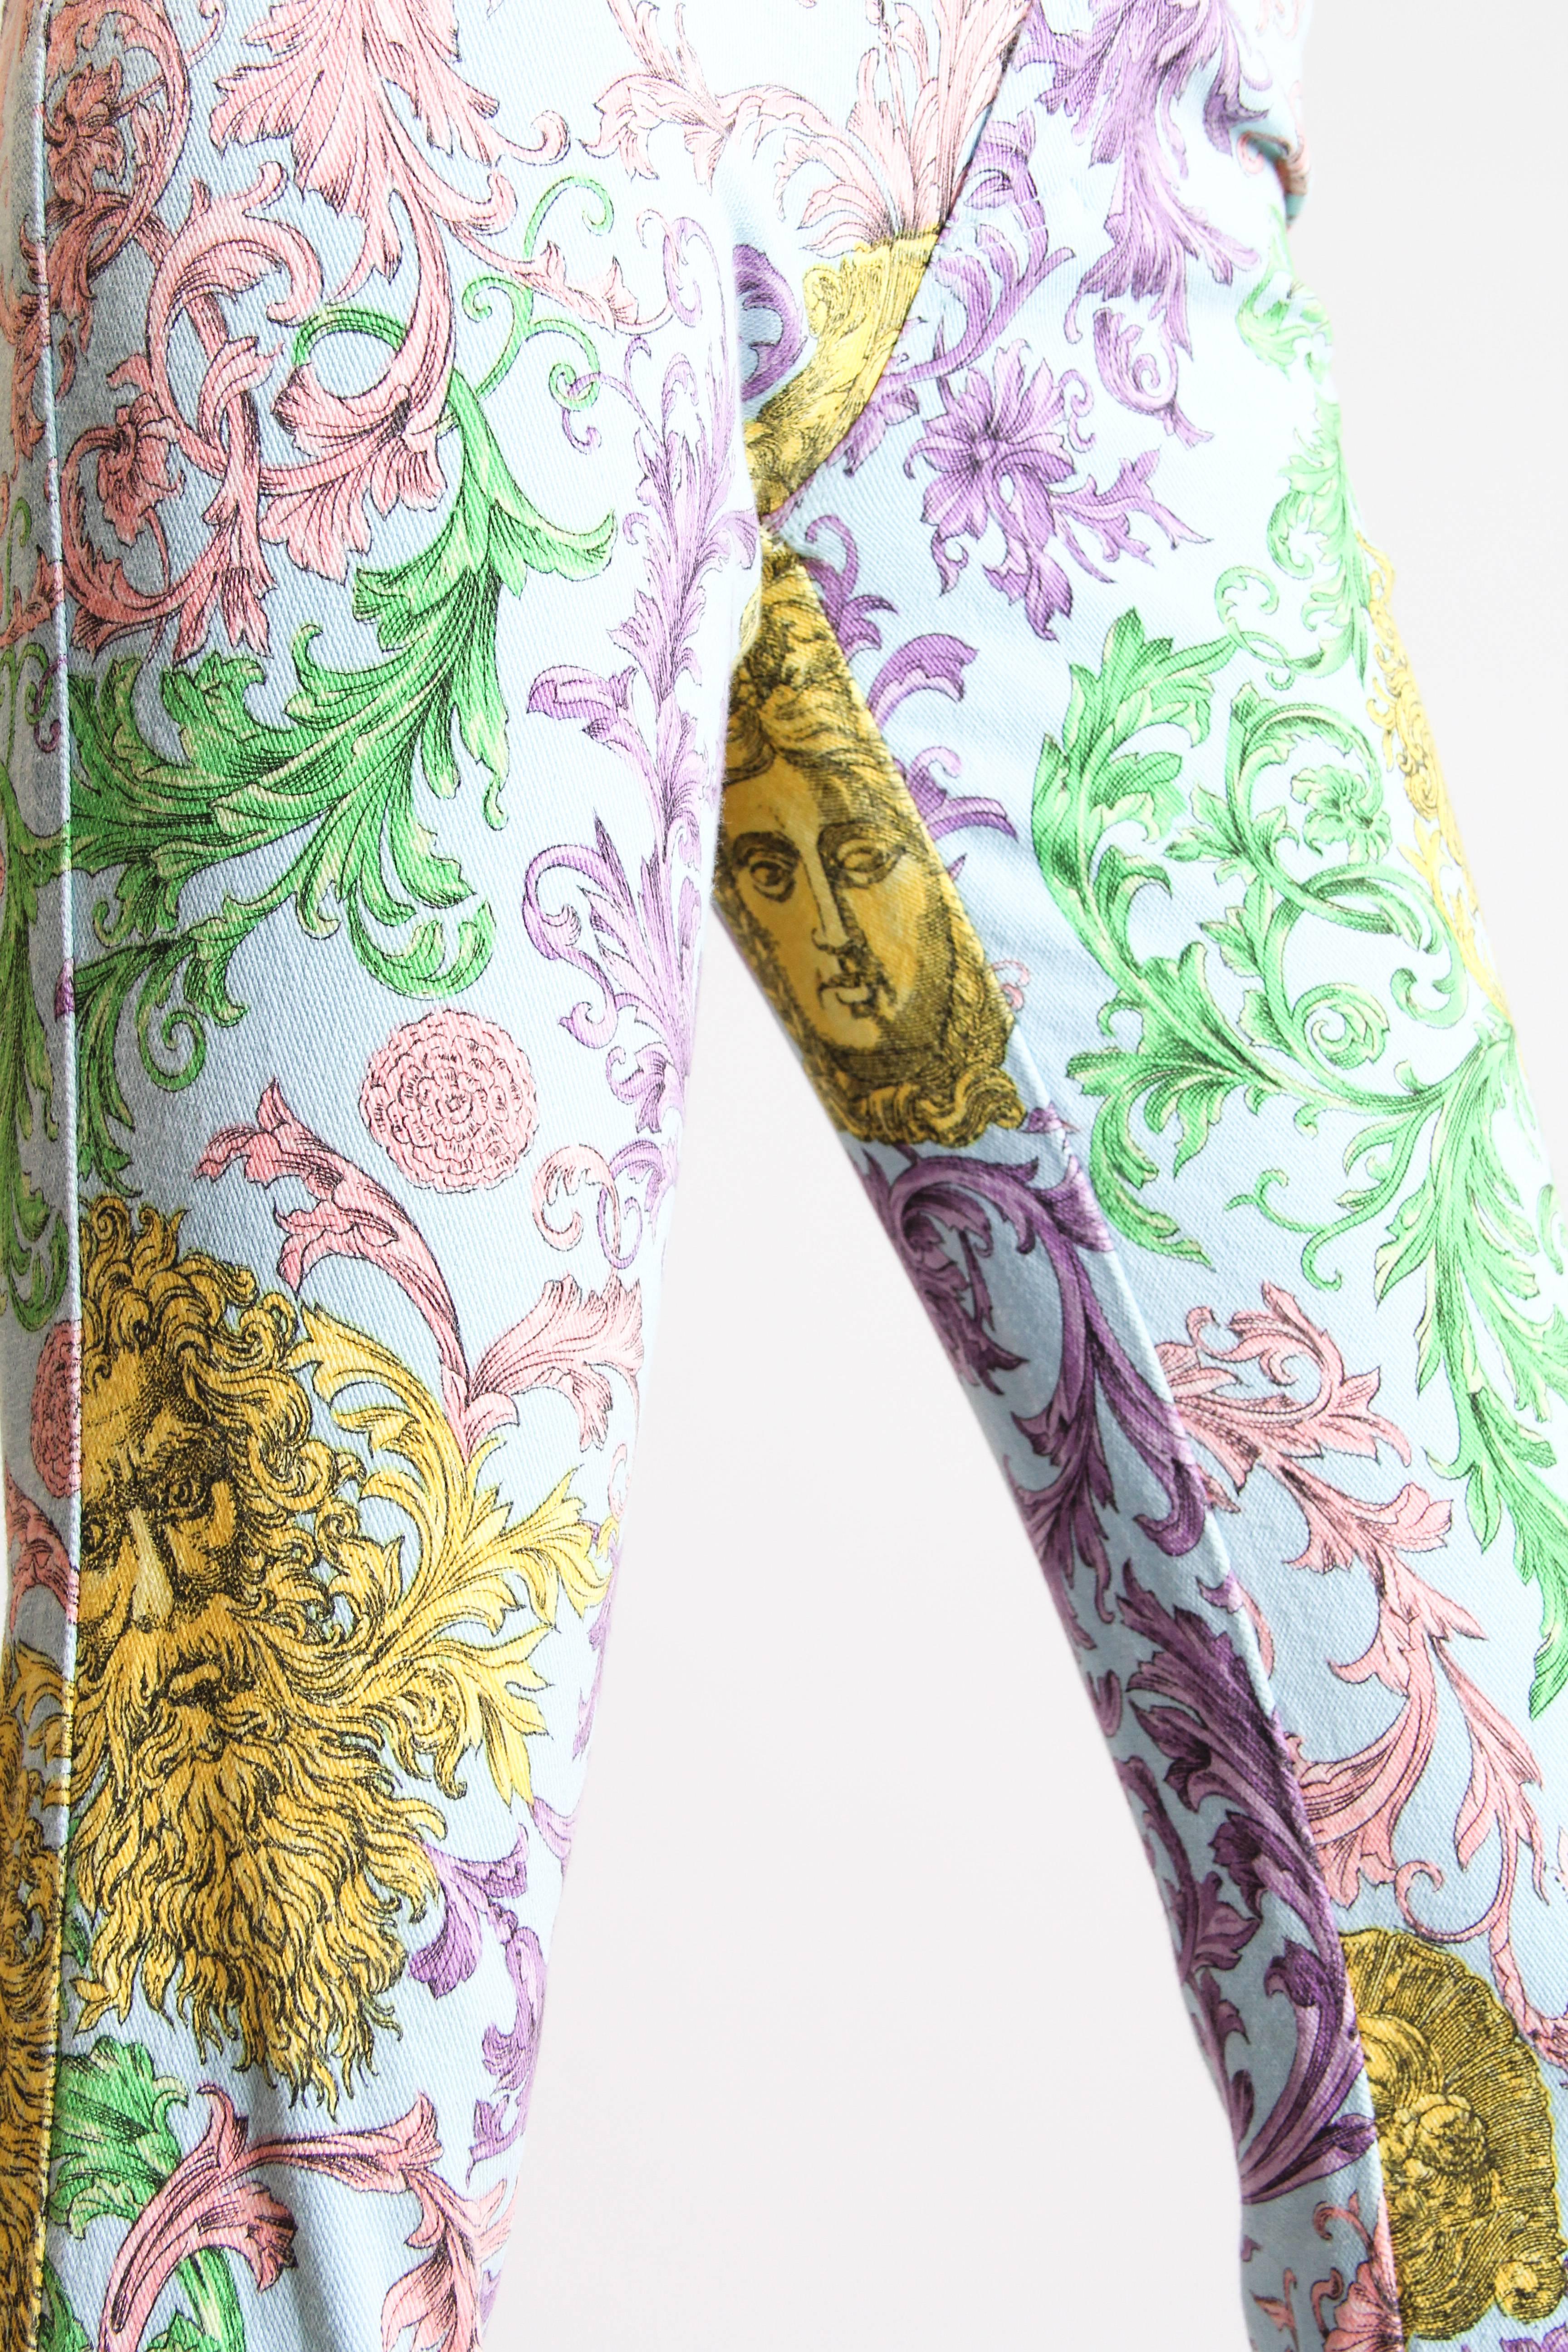 Women's Gianni Versace Baroque Print High-Waisted Jeans